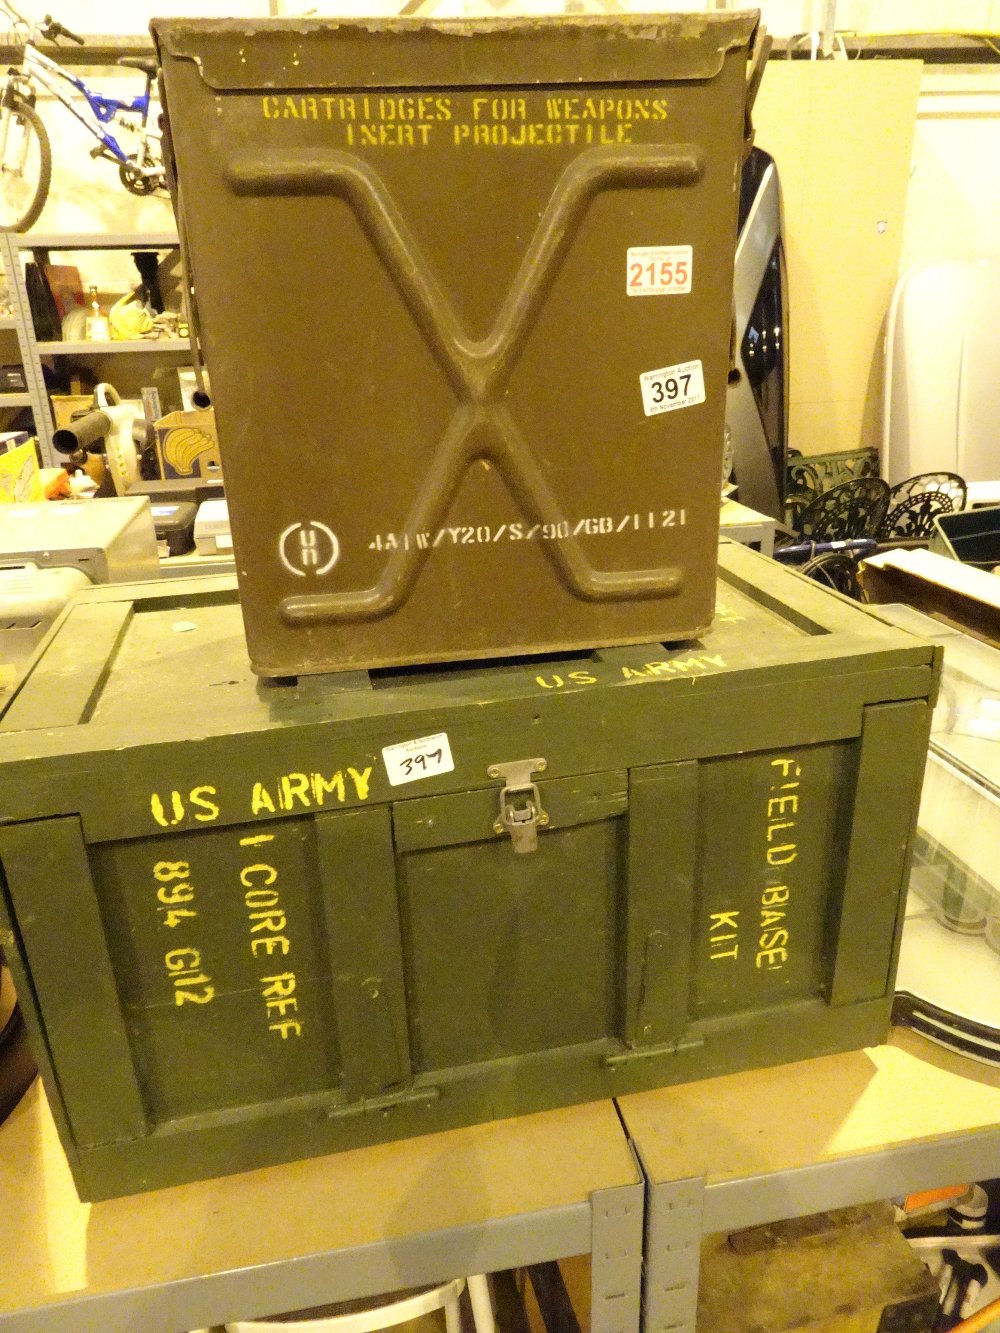 US Army field base kit wooden carry box and a metal ammo box